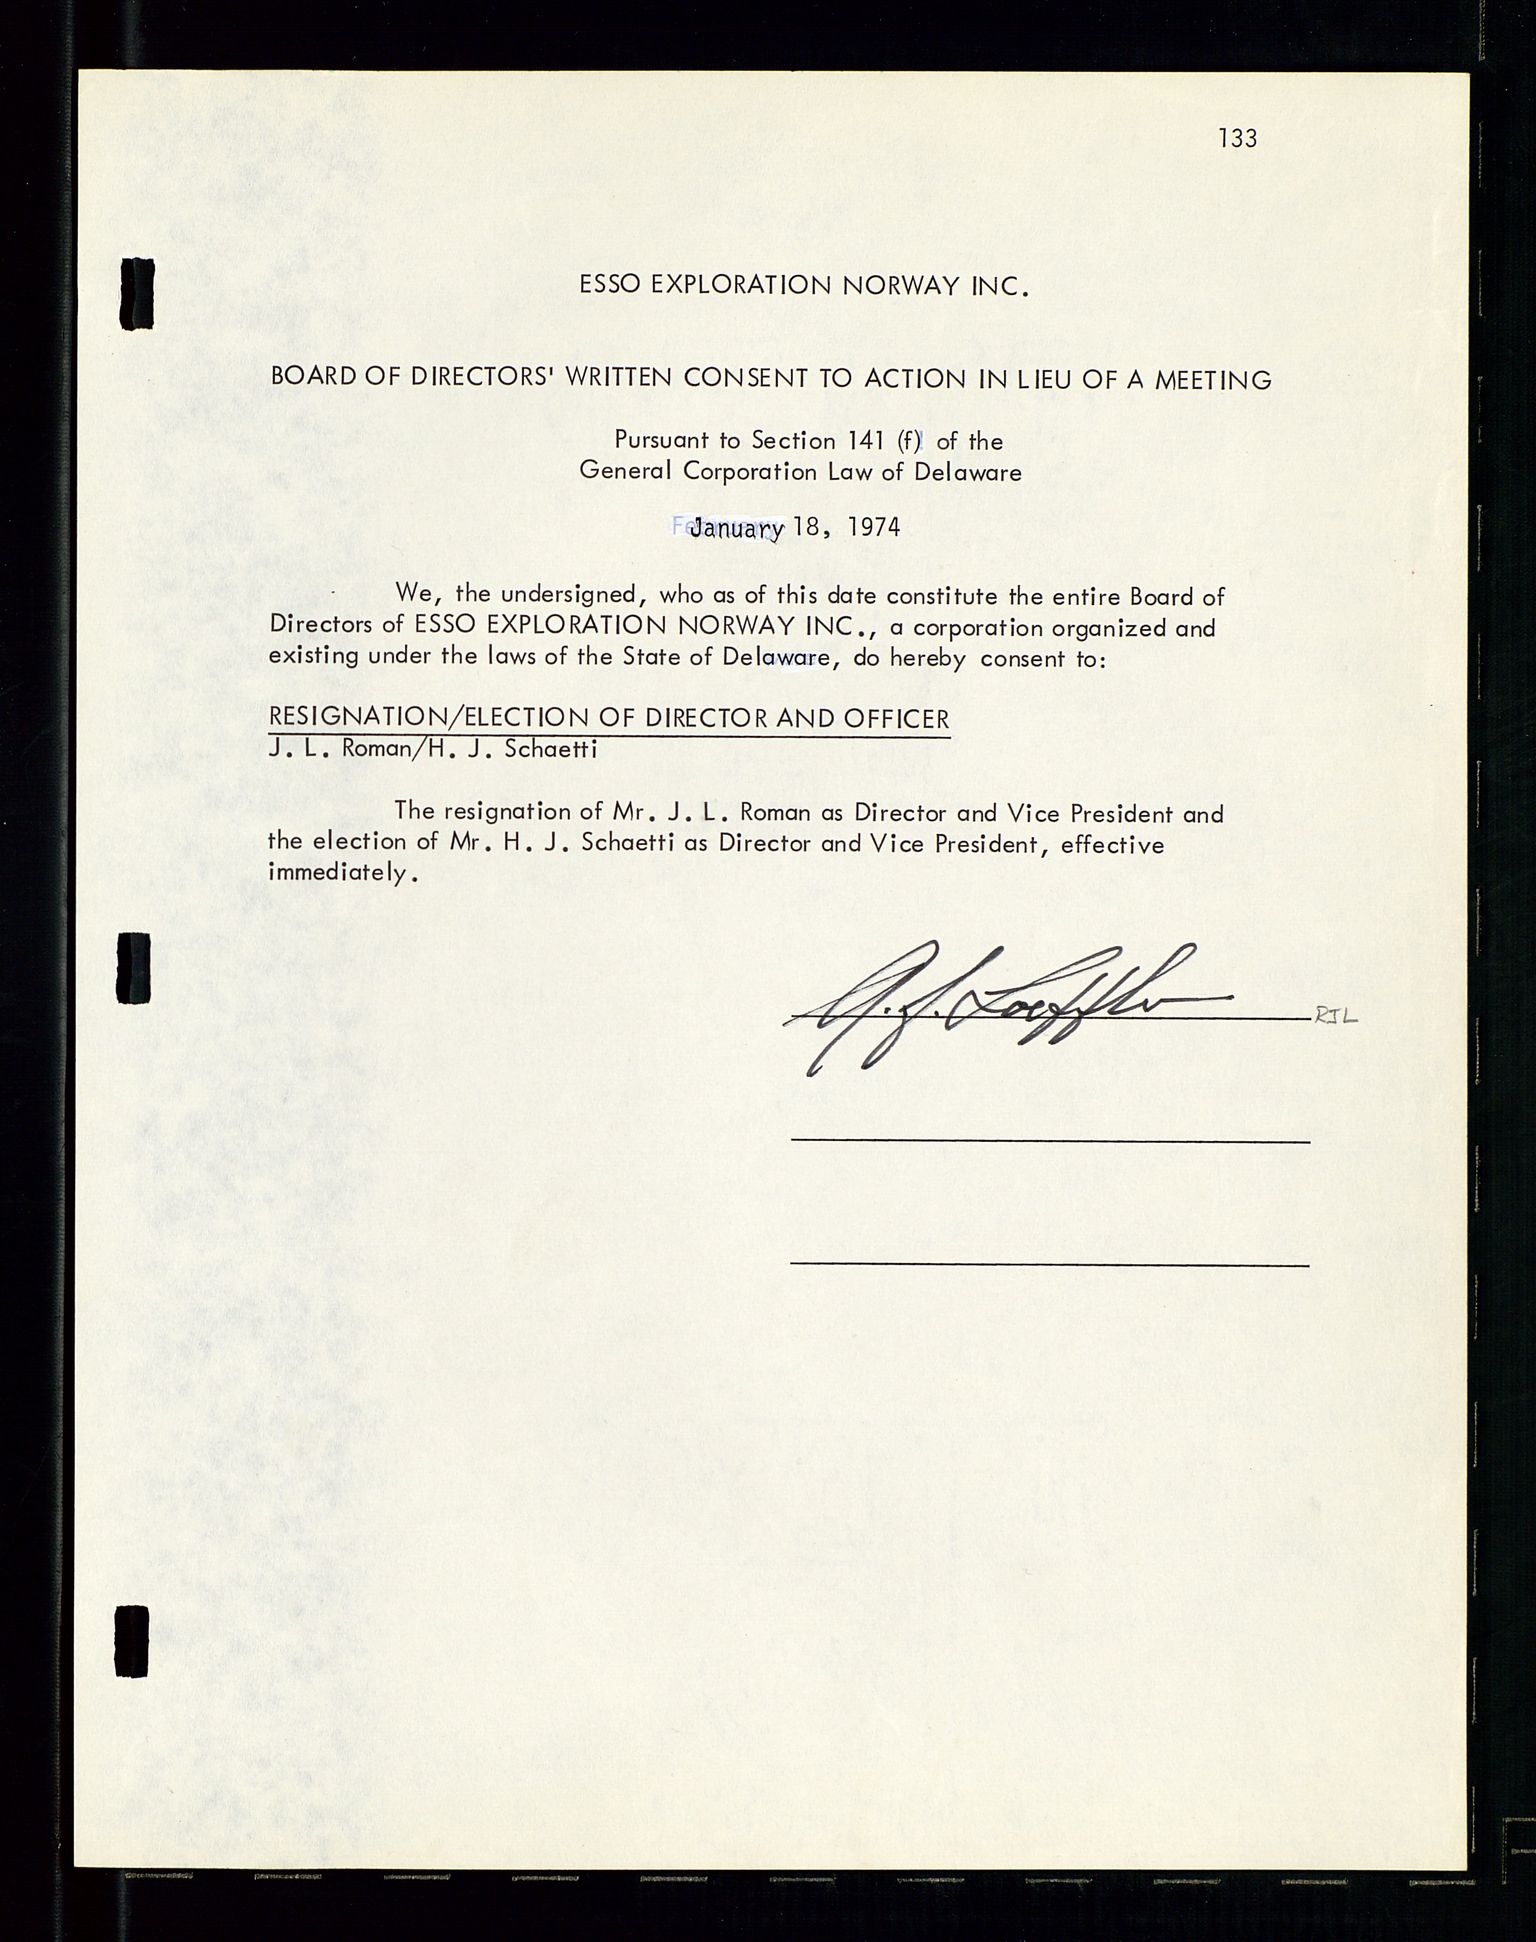 Pa 1512 - Esso Exploration and Production Norway Inc., SAST/A-101917/A/Aa/L0001/0001: Styredokumenter / Corporate records, By-Laws, Board meeting minutes, Incorporations, 1965-1975, p. 133